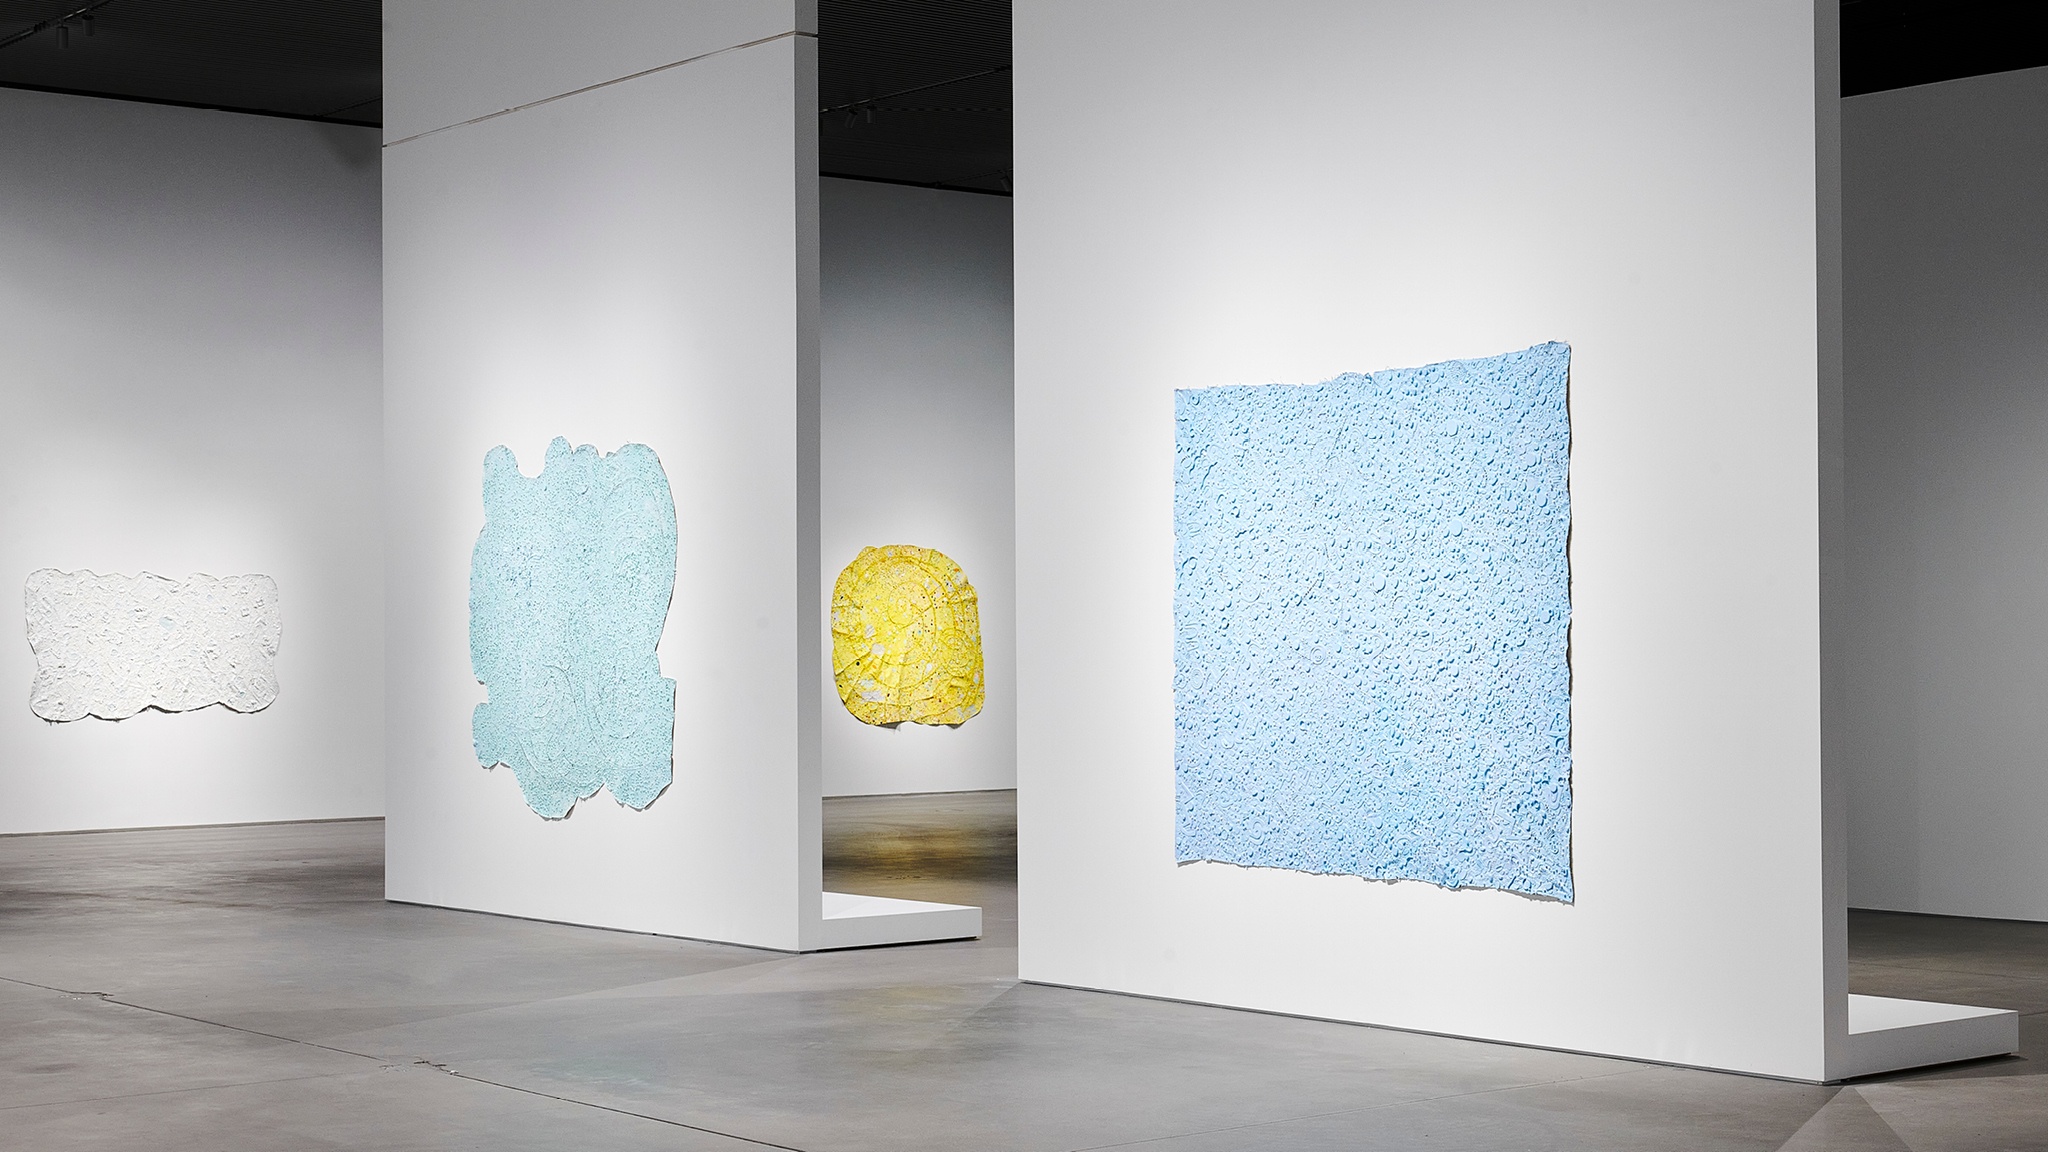 Abstract paintings in the exhibition "Howardena Pindell: Rope/Fire/Water." In the foreground are two blue paintings, with a curvilinear yellow painting visible through a gap in the wall in the background, and a white rectangular canvas to the left.